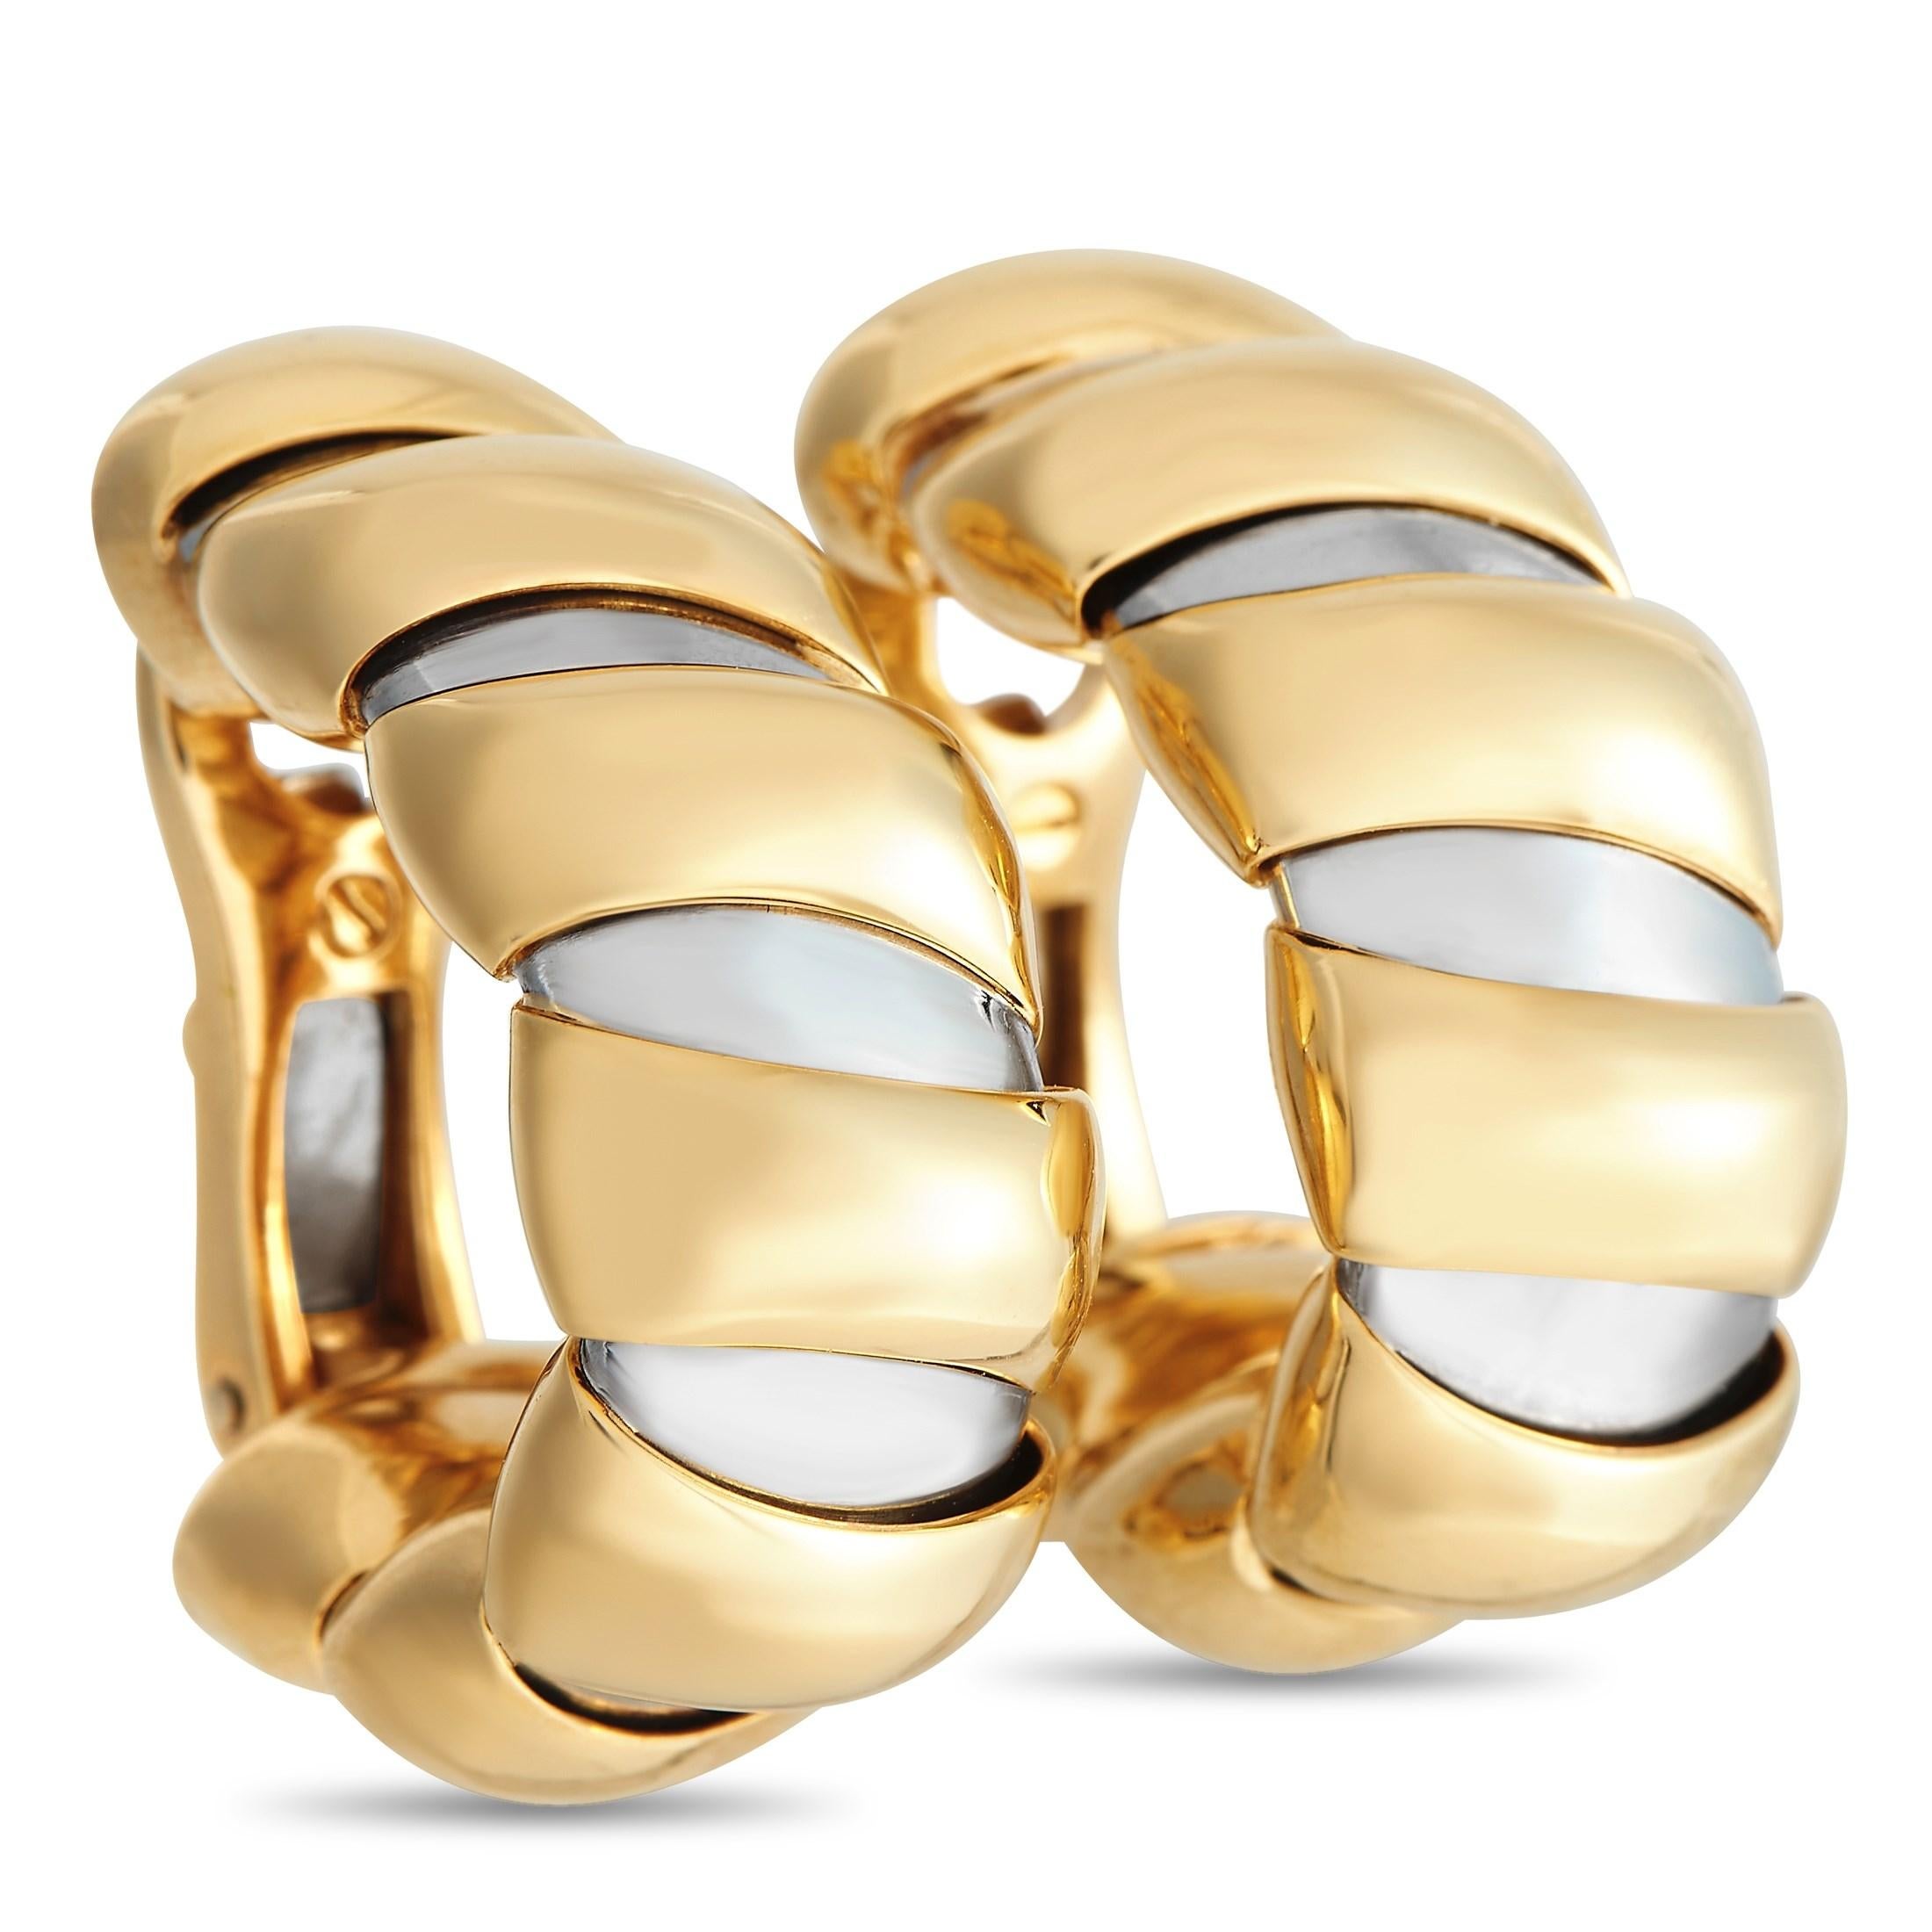 A stunning combination of 18K yellow gold and stainless steel make these Bvlgari Tubogas earrings a subtle accessory that will always make a statement. Each one of these curved earrings measures 0.85” long, 0. 37” wide, and comes complete with